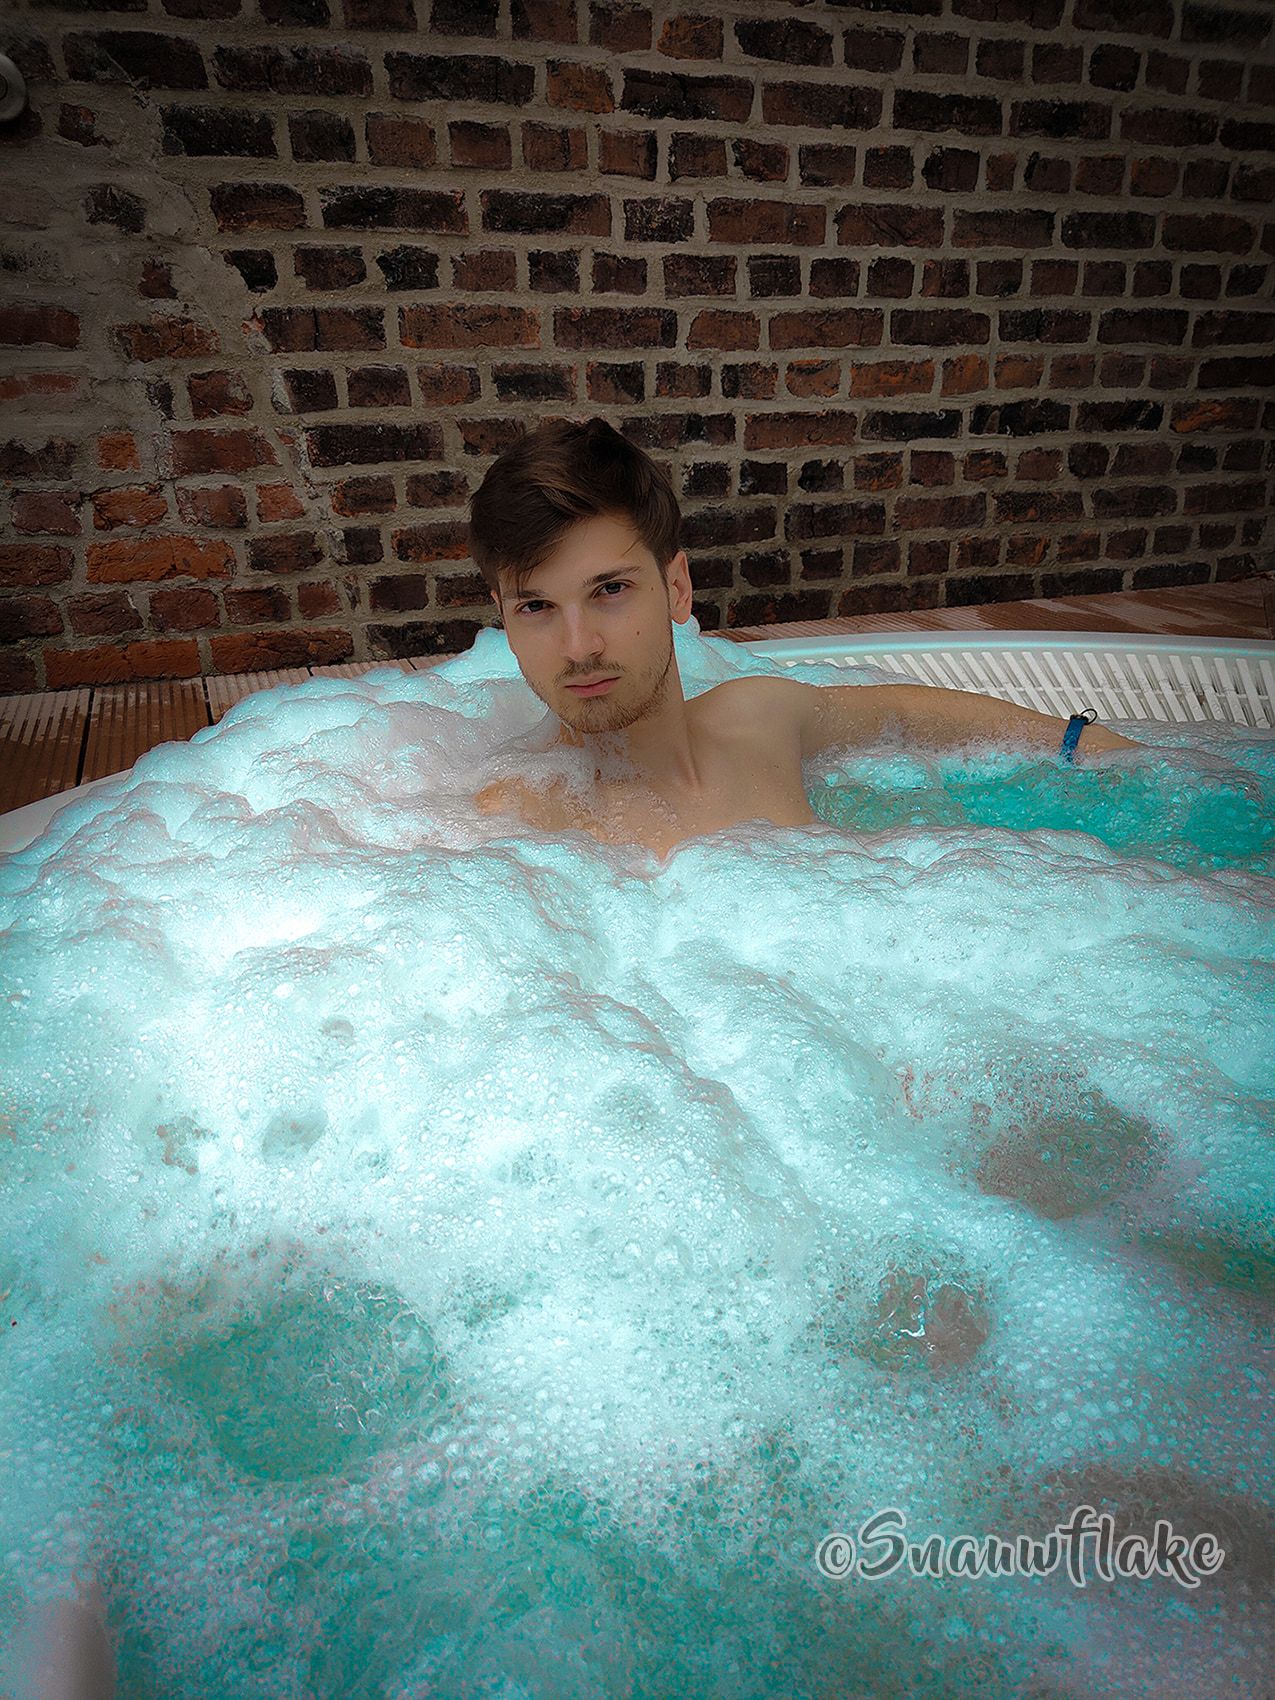 Twink in a hot tub